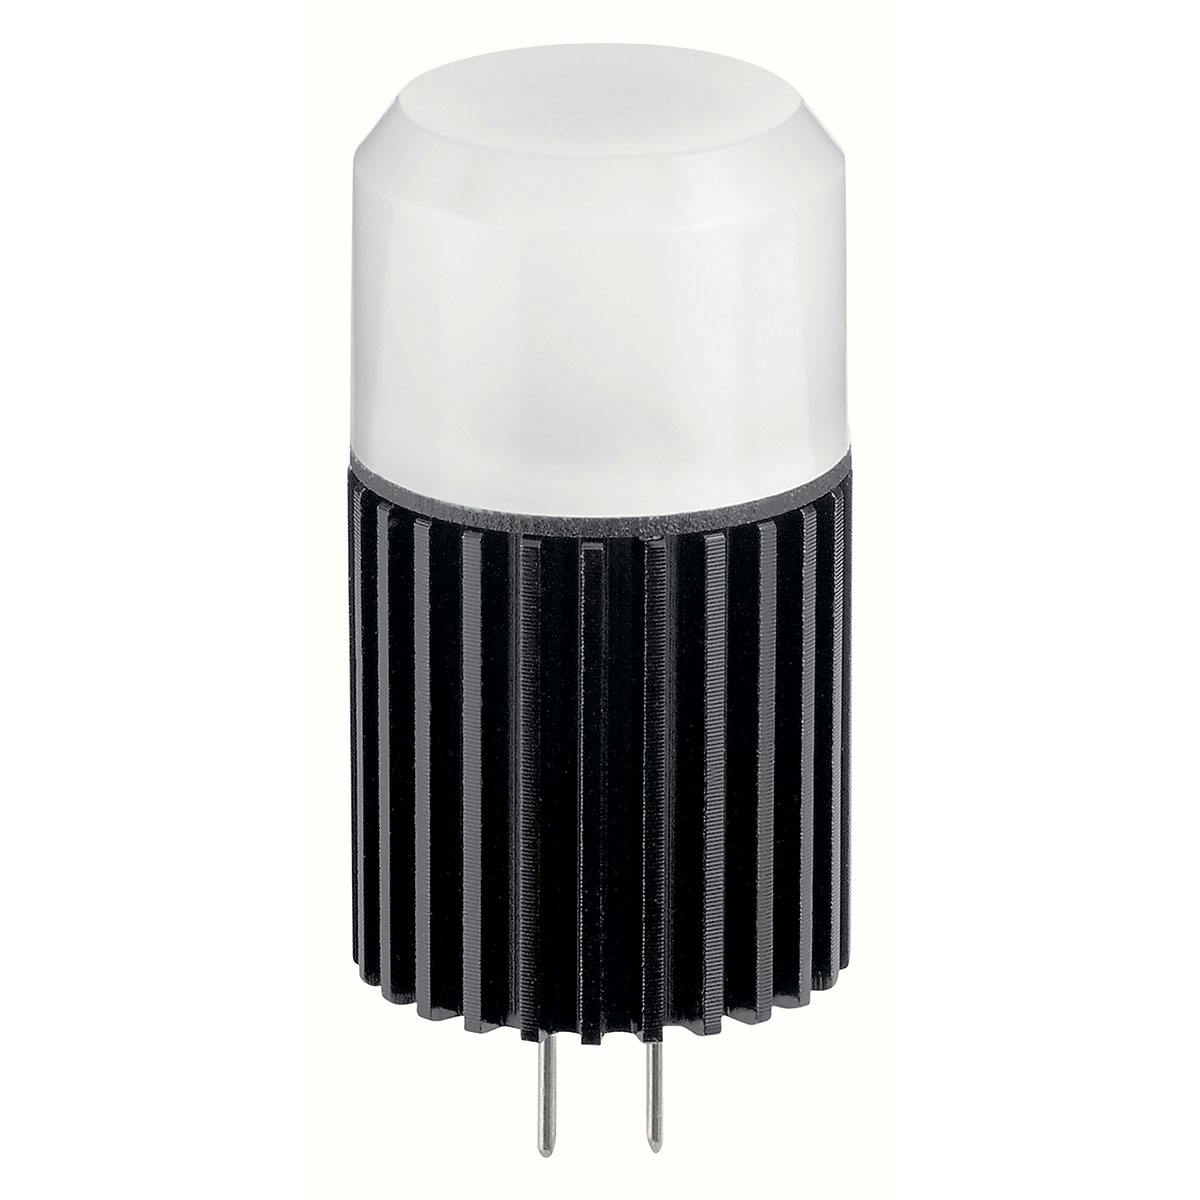 2700K LED T3 and G4 Bi-Pin 2W 300 Degree on a white background